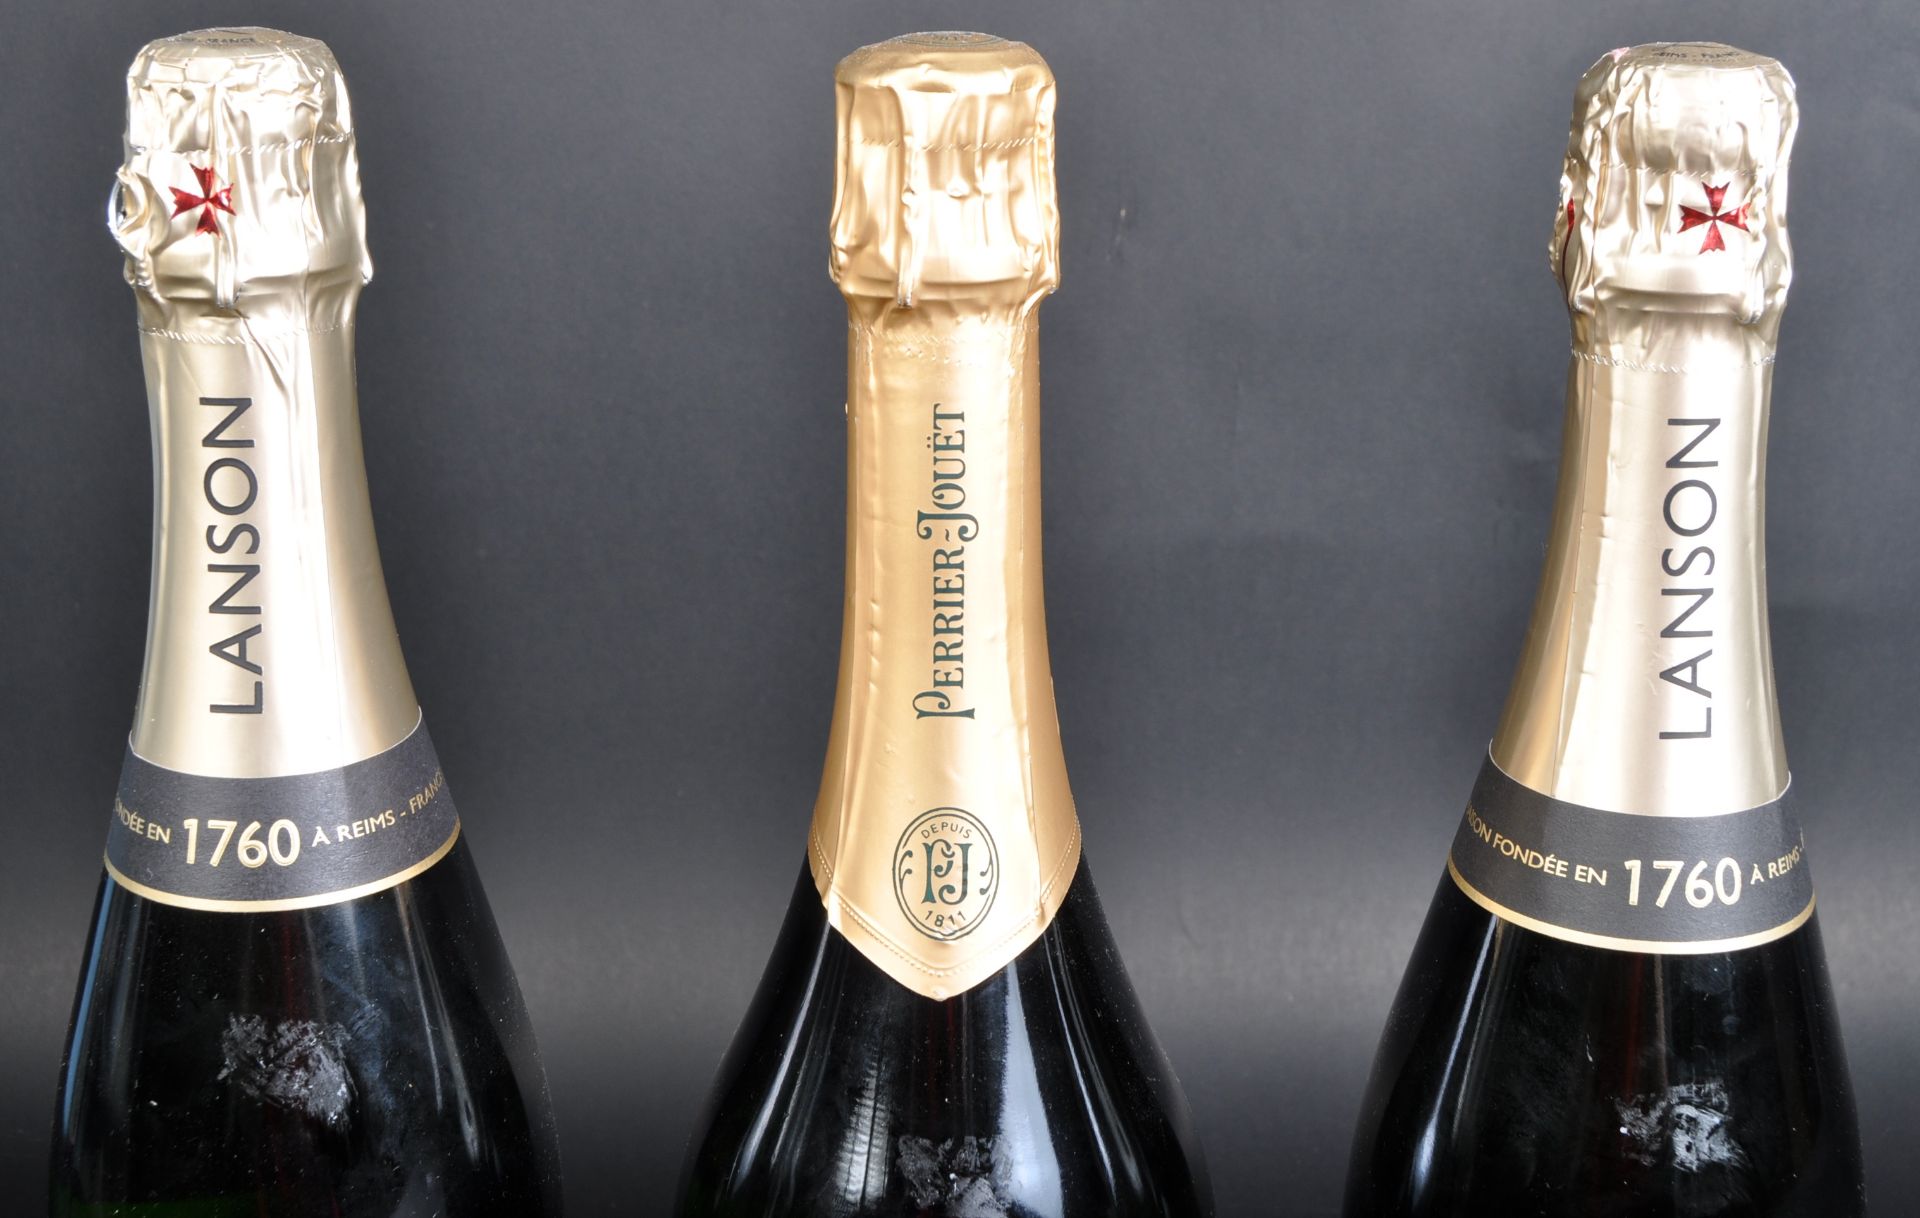 A SELECTION OF VINTAGE BRUT CHAMPAGNE - Image 3 of 5